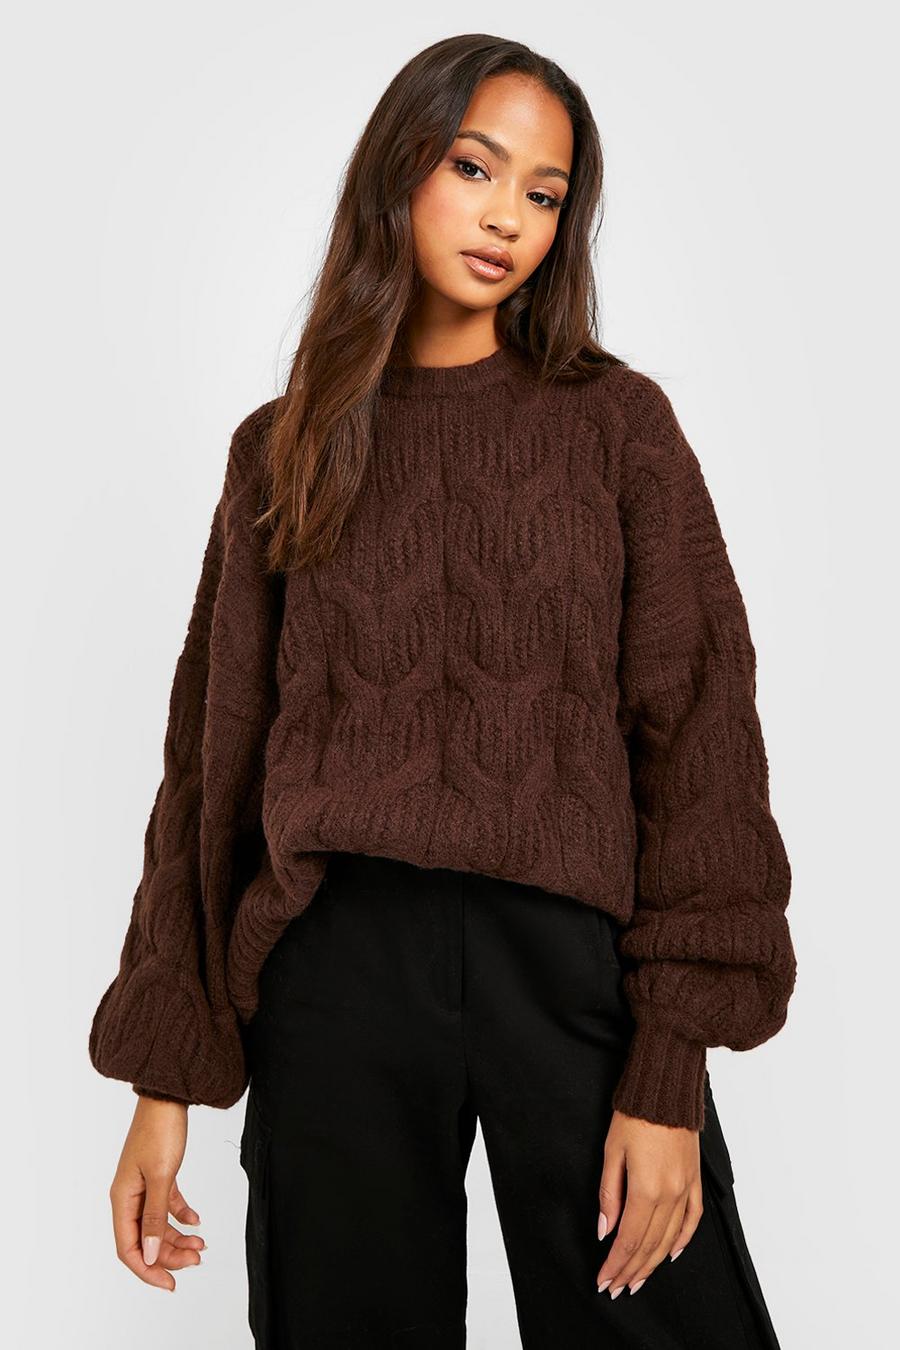 Cable Knit Crew Neck Sweater and Leggings Set - Tan